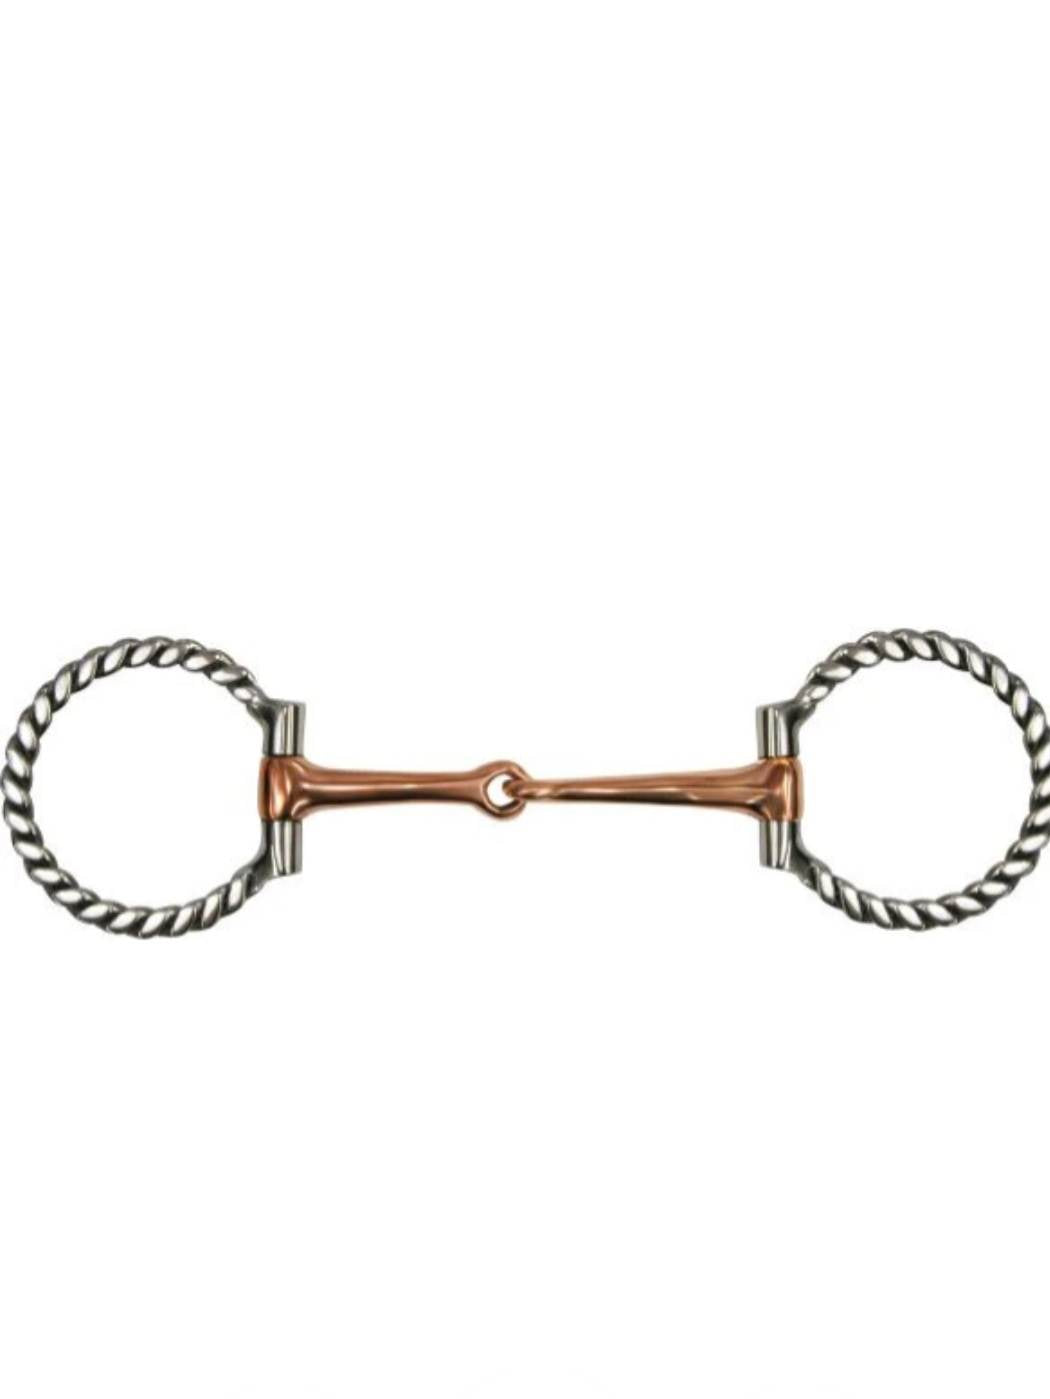 Bits - Stainless Steel & Copper D Ring Snaffle